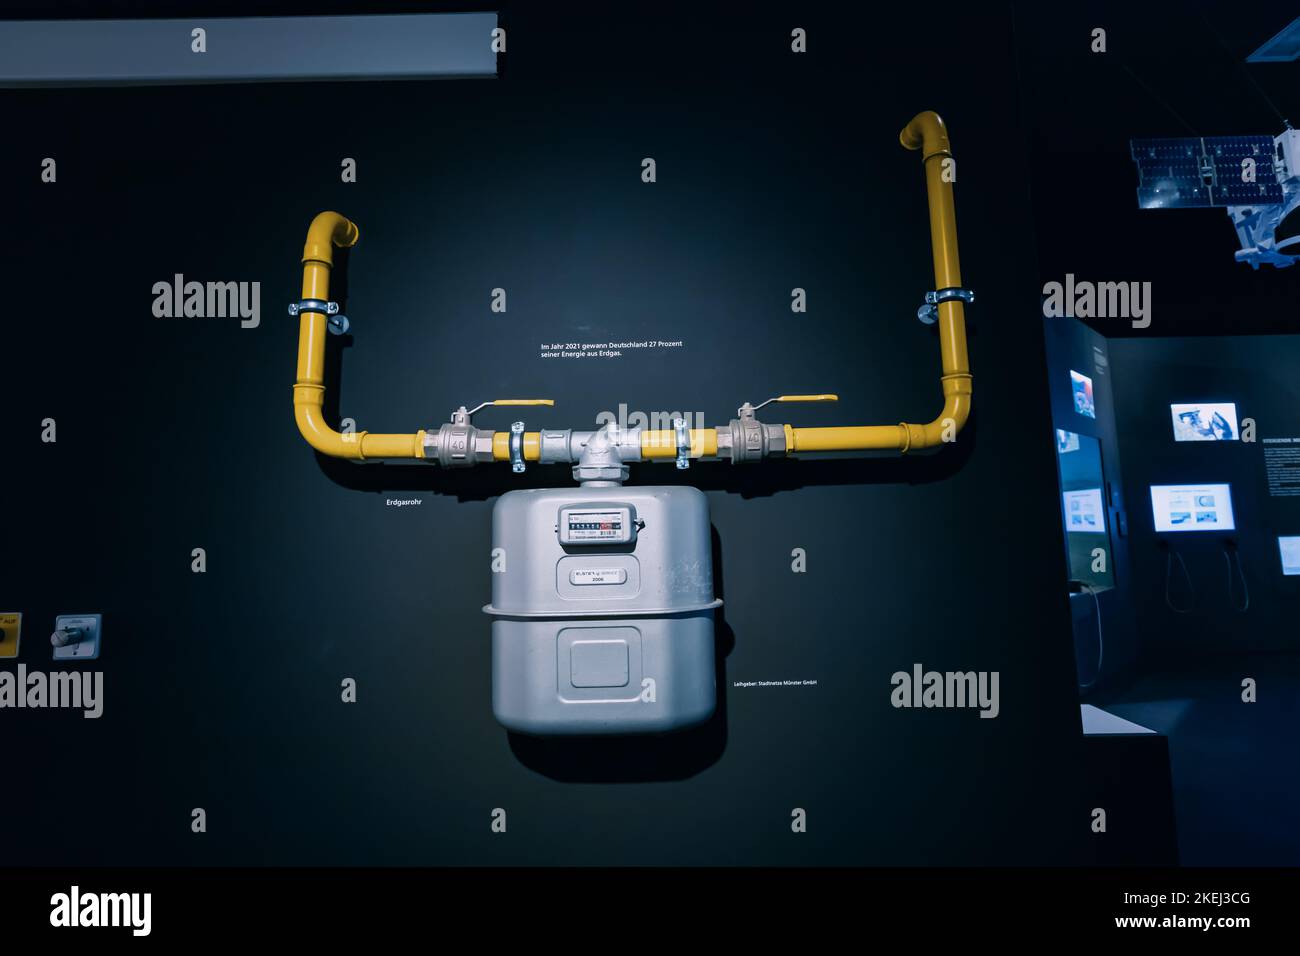 26 July 2022, Munster, Germany: gas meter at the museum exhibition. Problems of the energy crisis and gas storage capacity Stock Photo